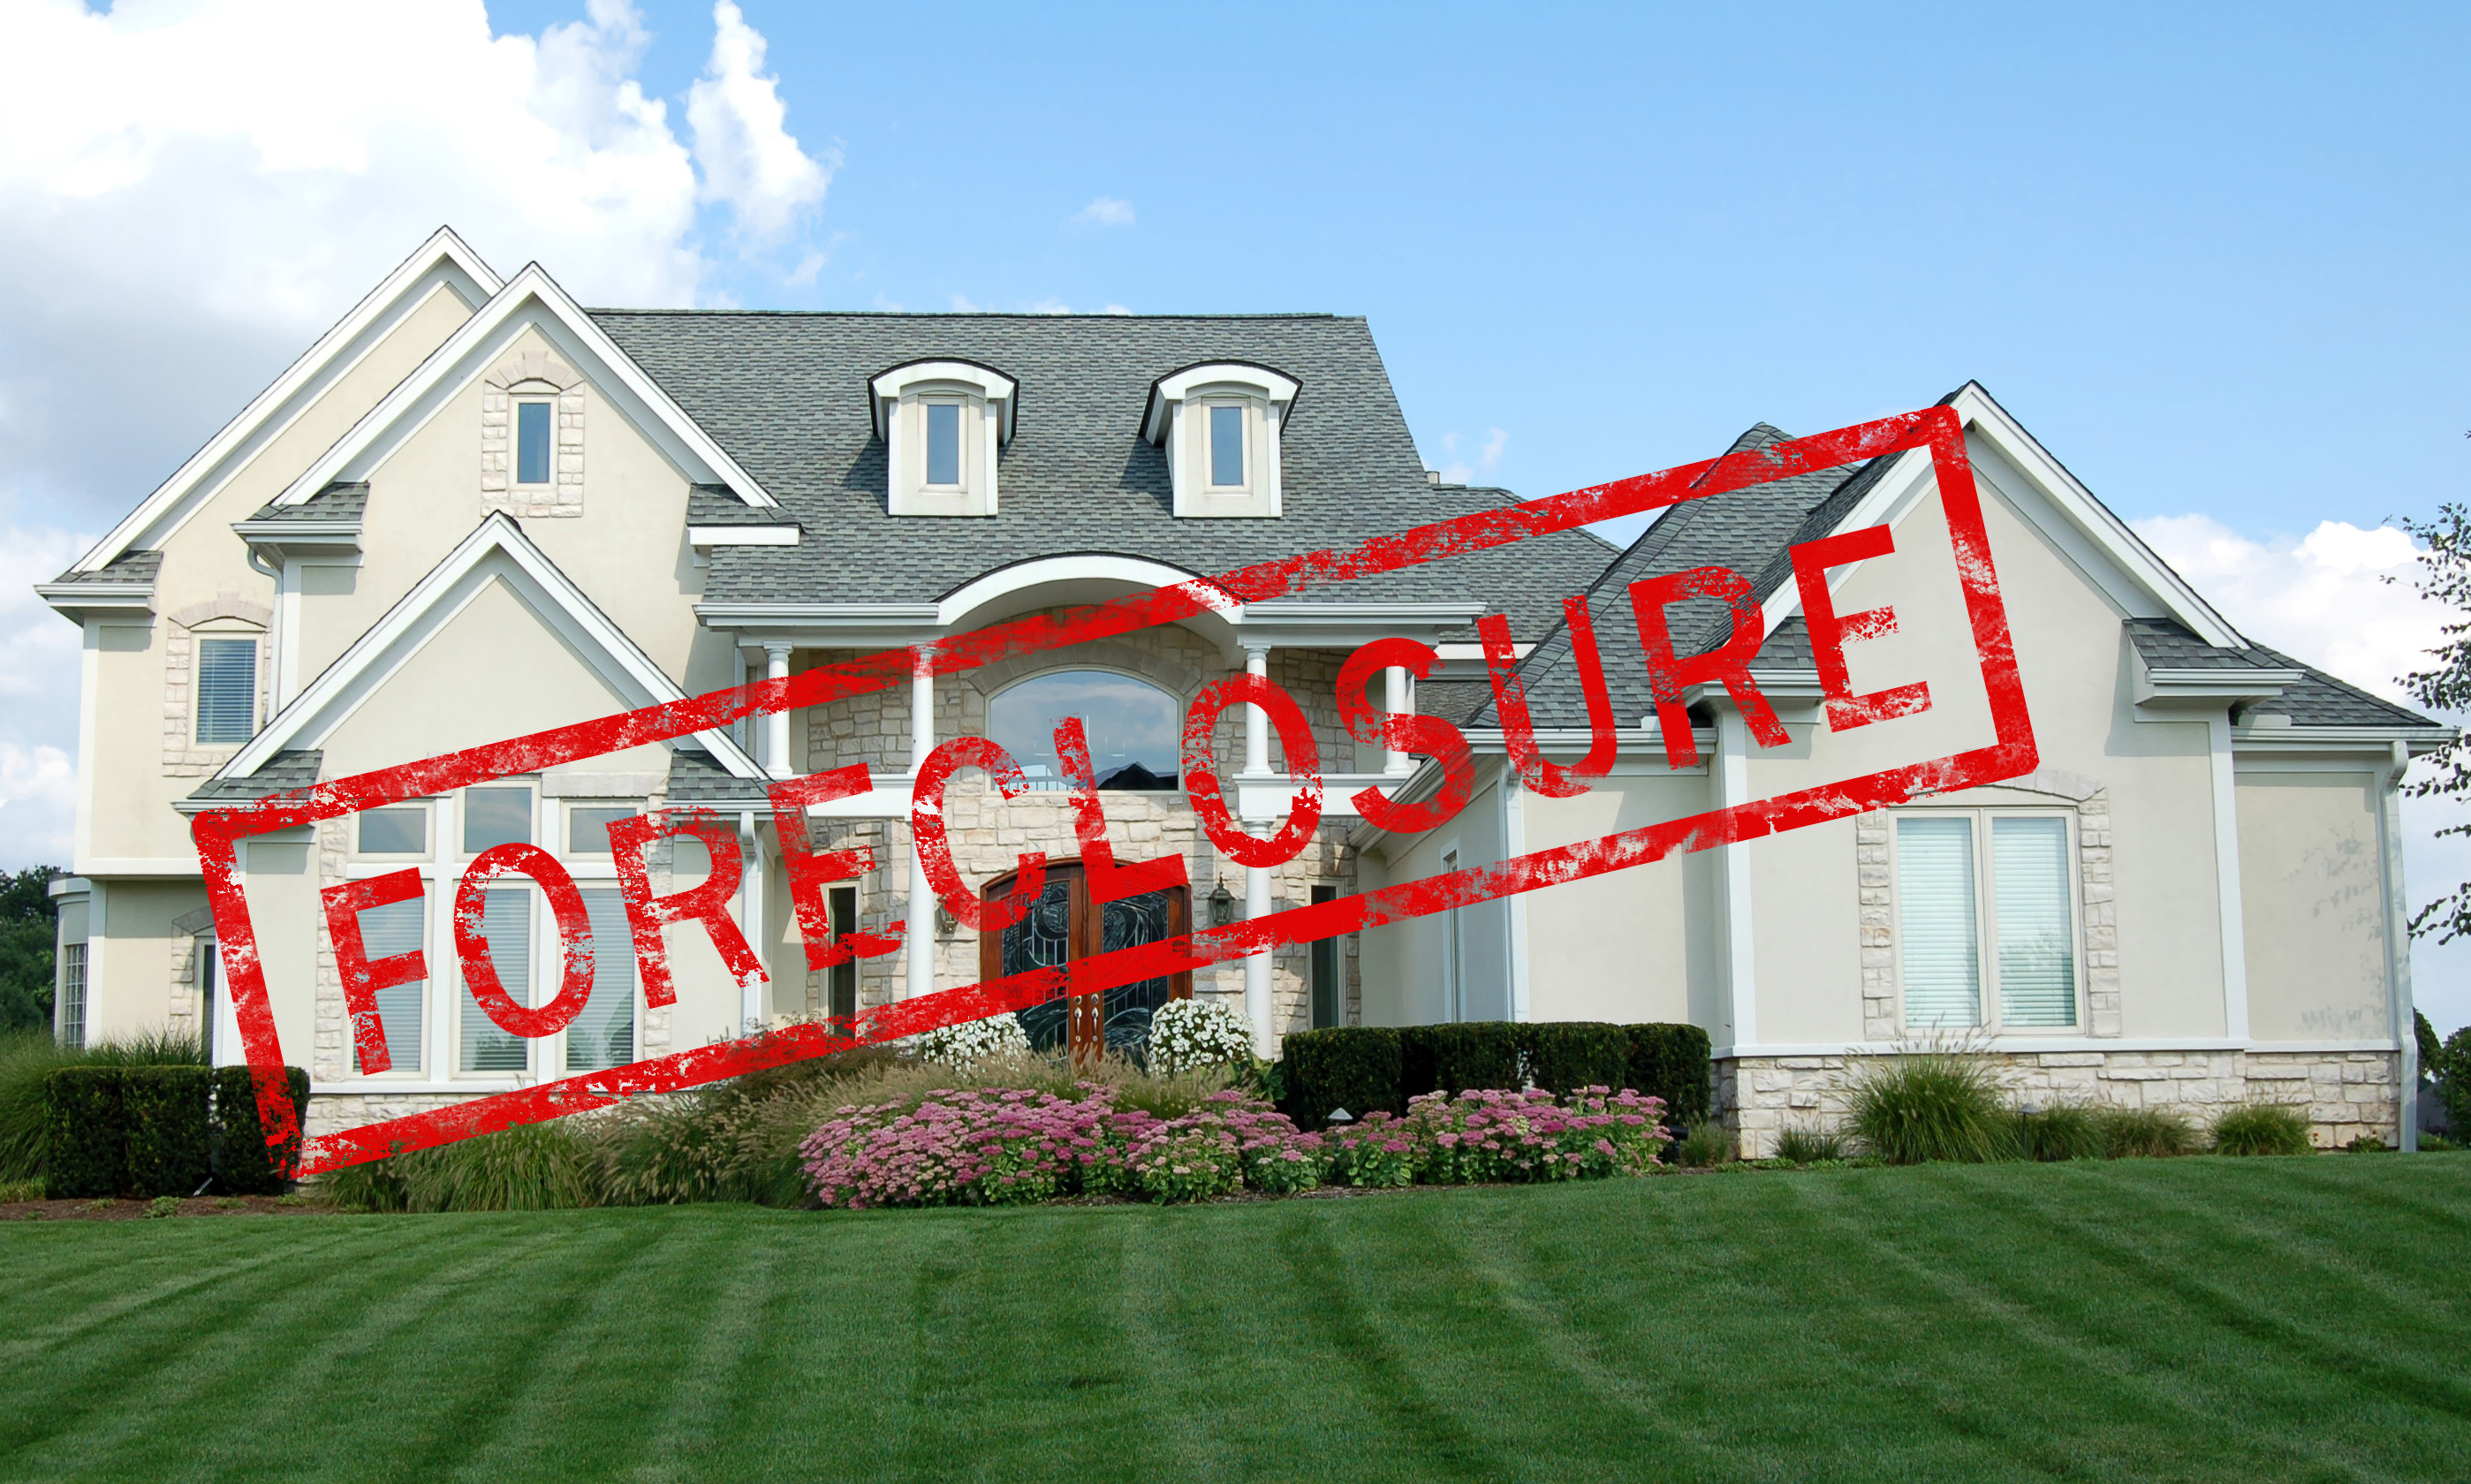 Call Watson Appraisal Services, Inc when you need appraisals on Wake foreclosures